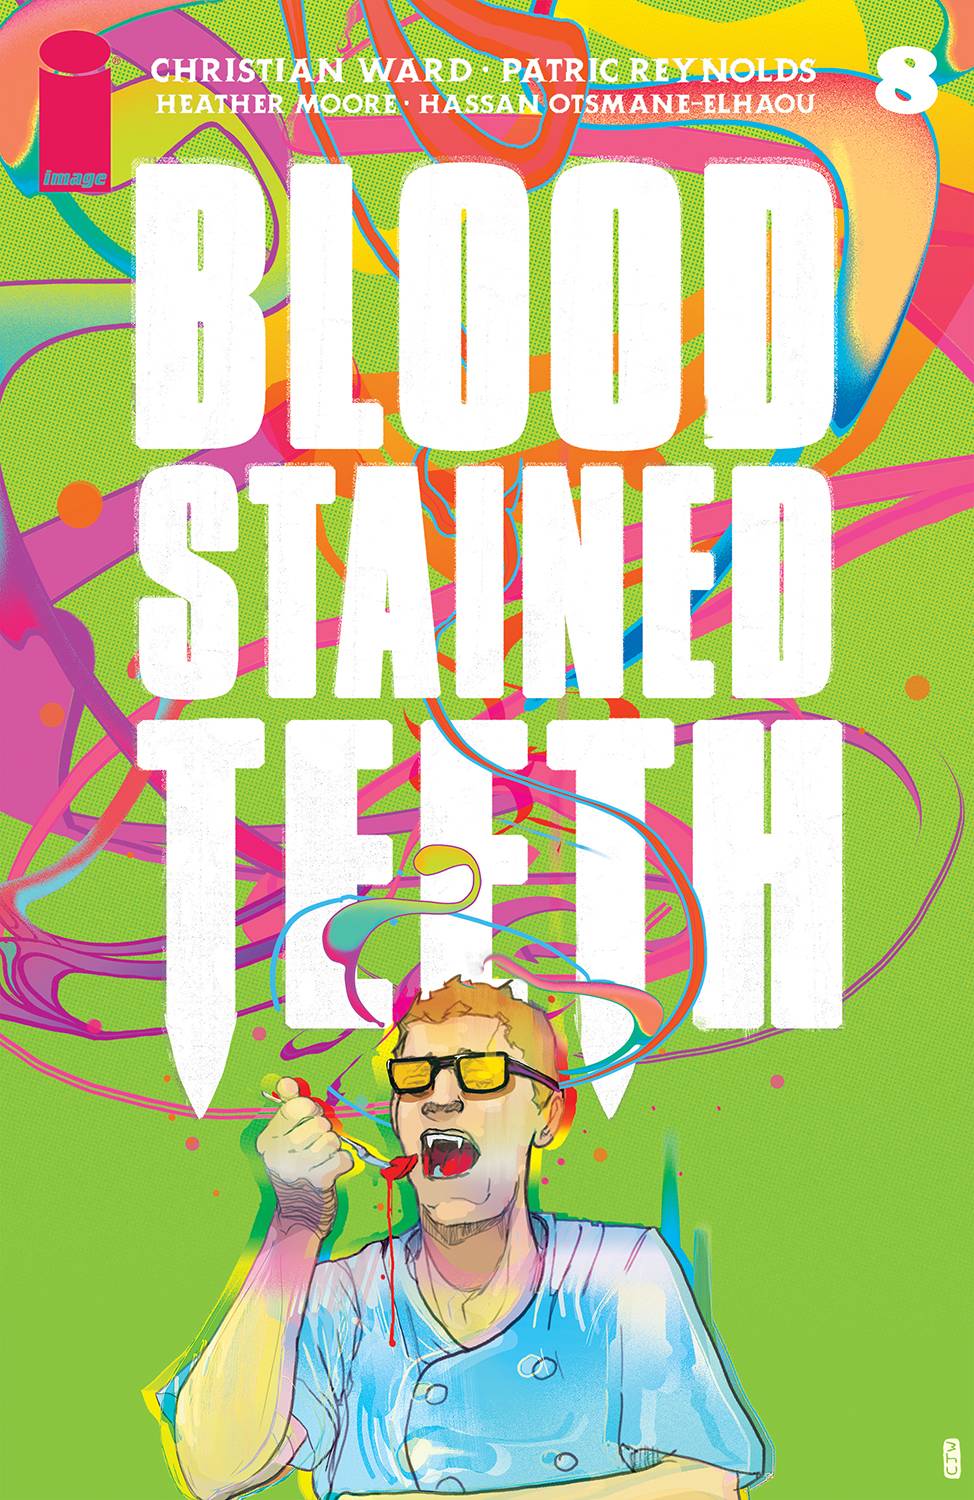 Blood Stained Teeth #8 Cvr A Ward (Mr) - State of Comics